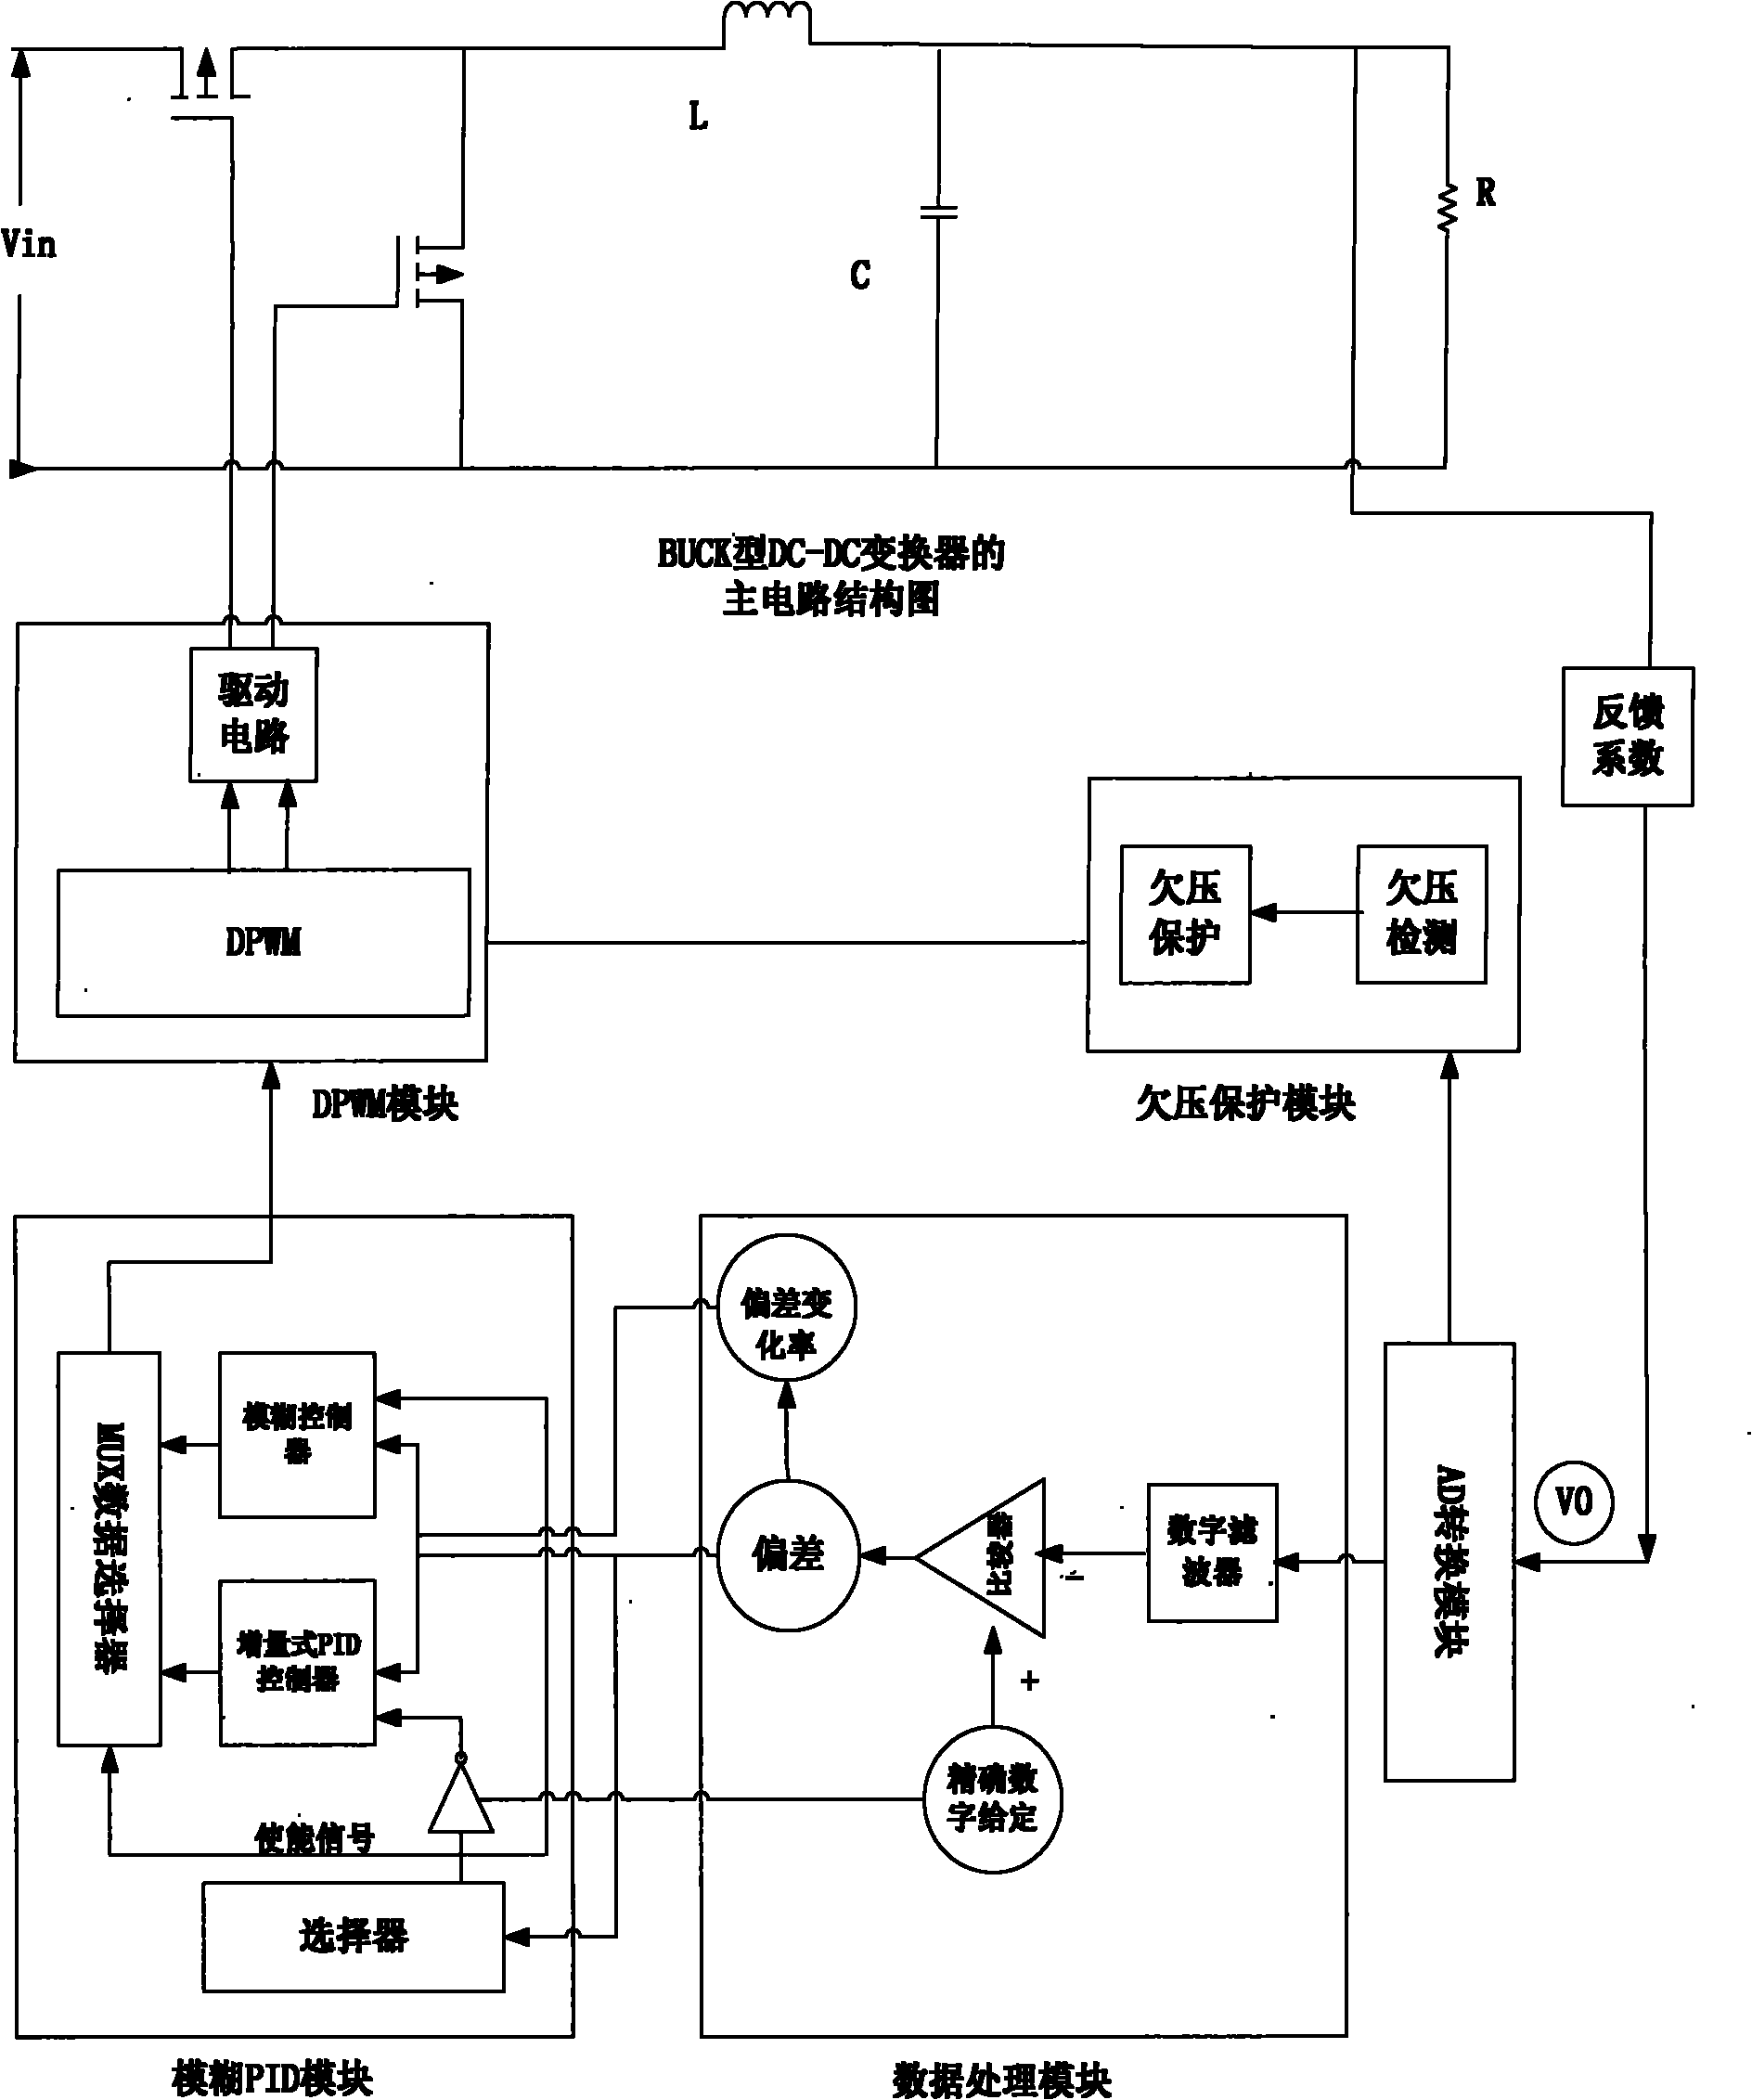 High transient response digital control system and method of switch power supply